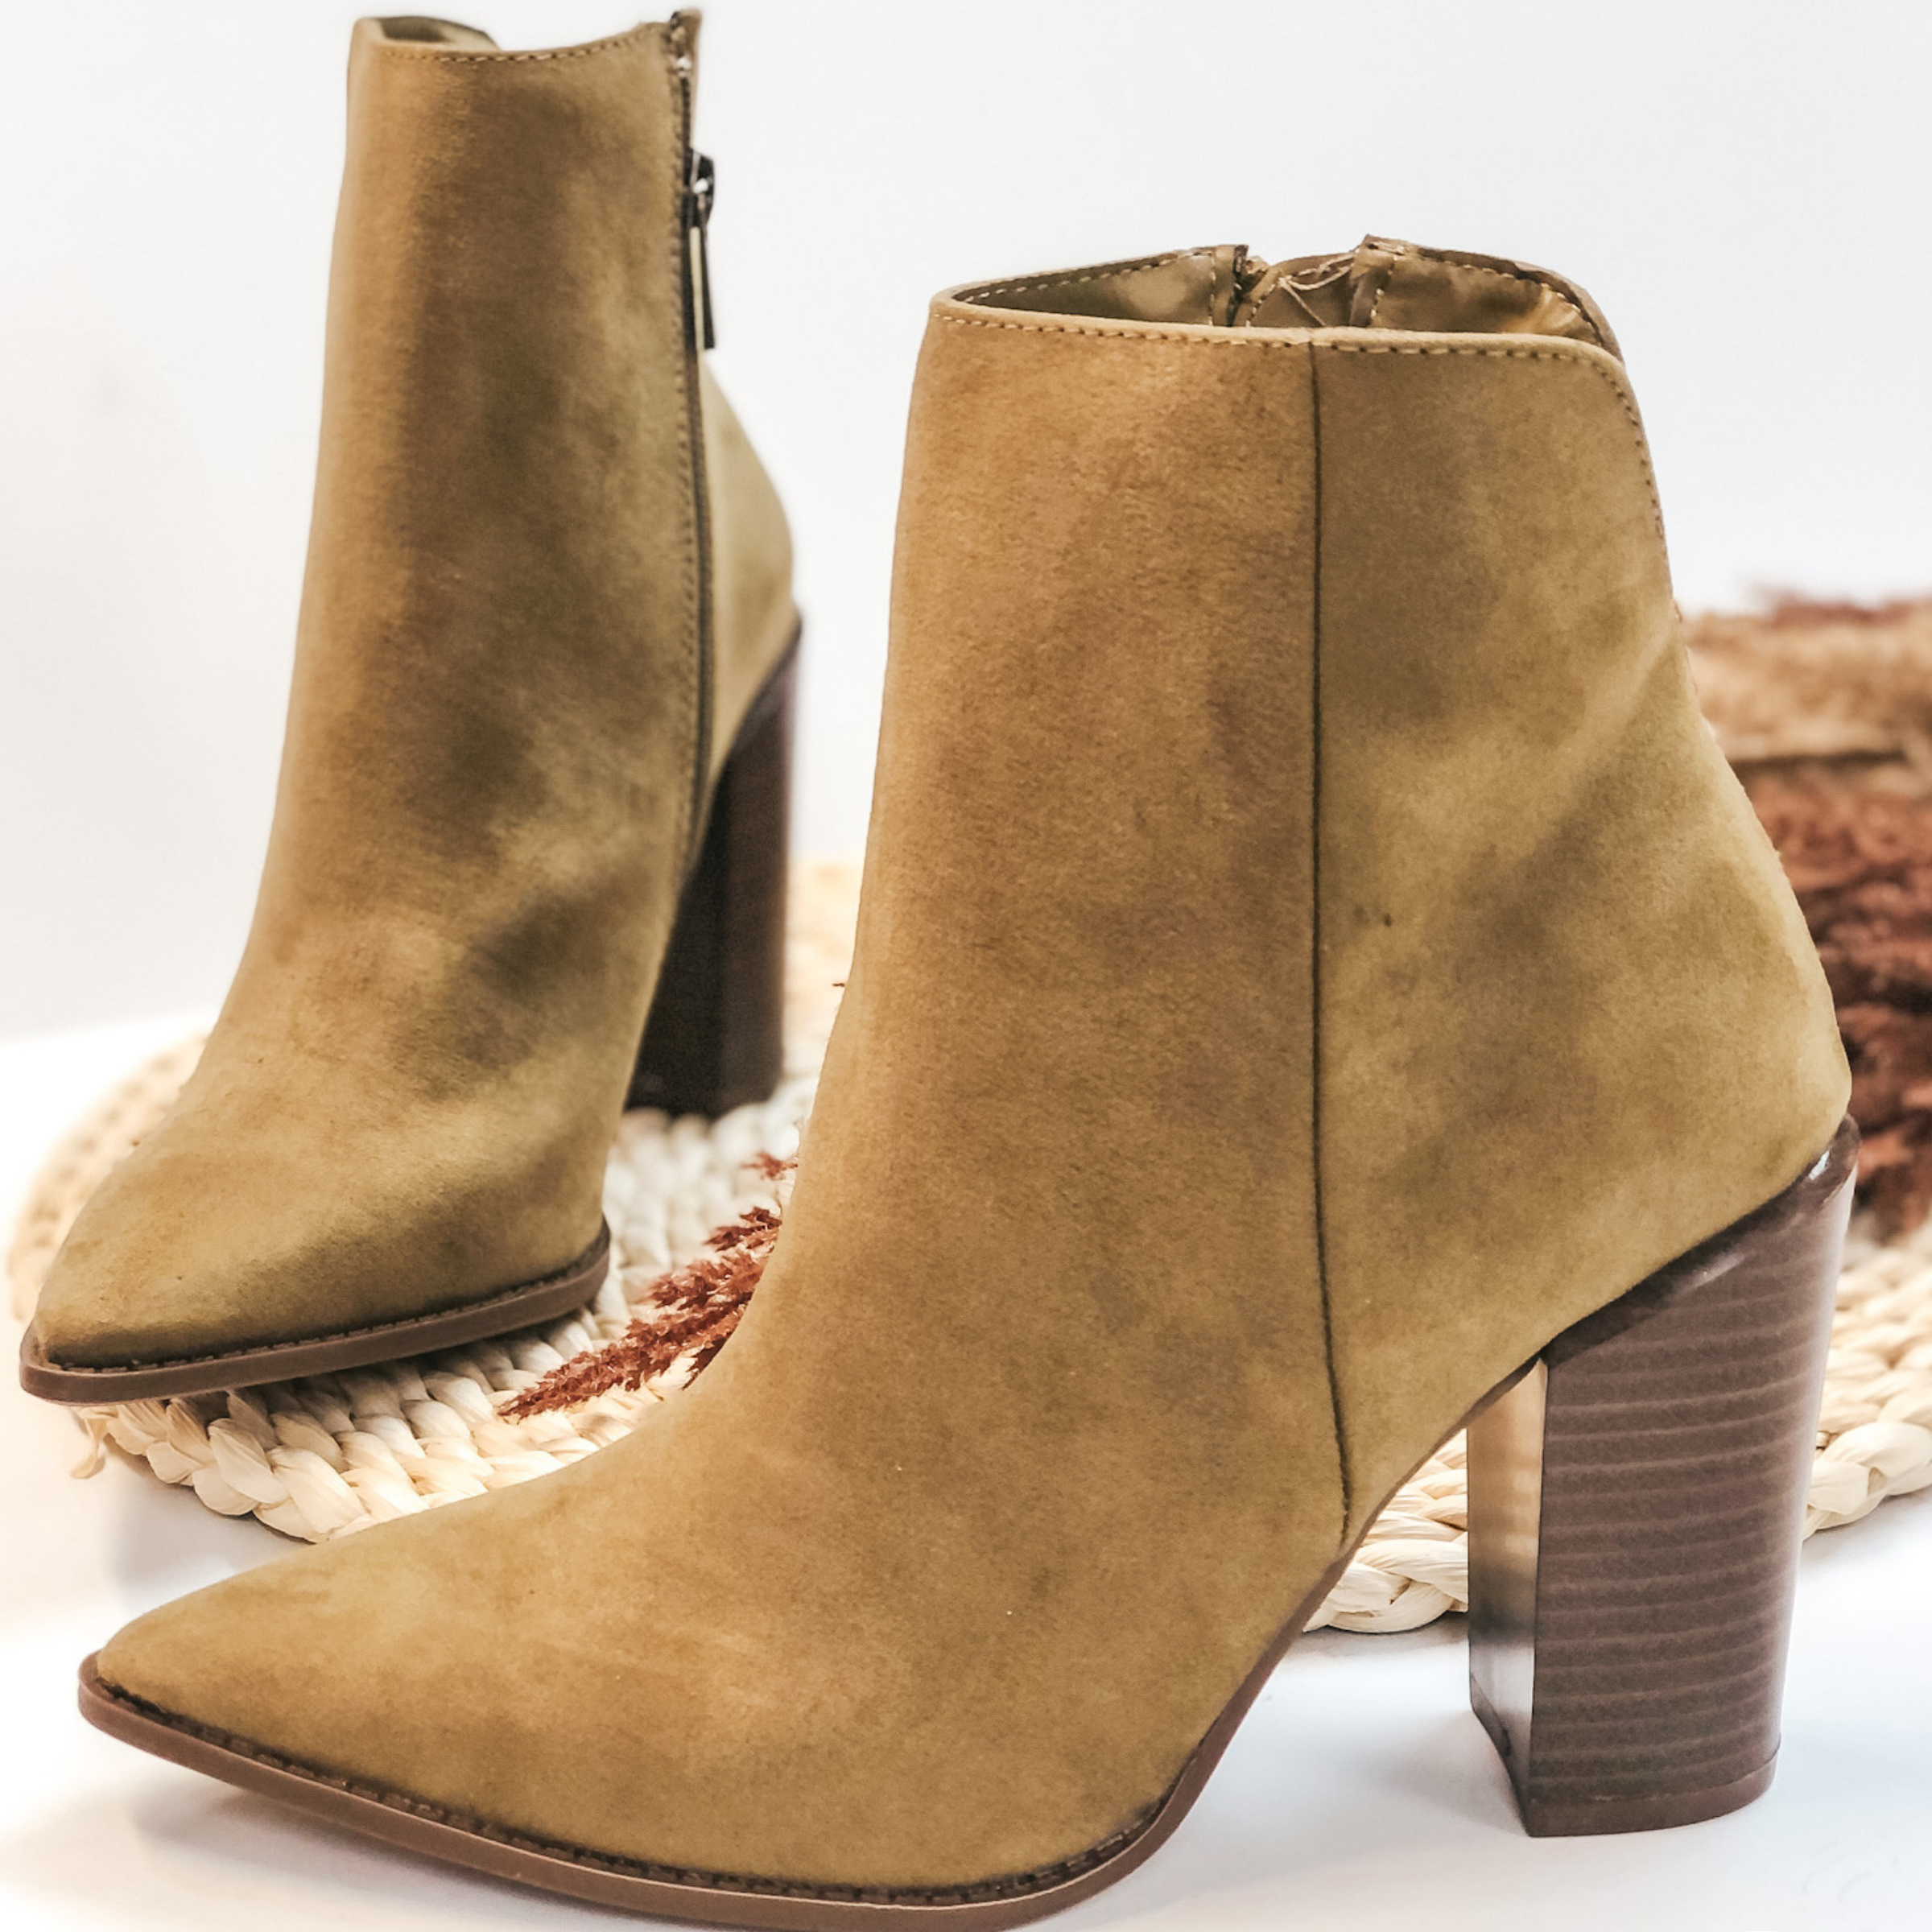 Last Chance Size 6| Walking By Side Zip Heeled Booties with Pointed Toe in Khaki - Giddy Up Glamour Boutique